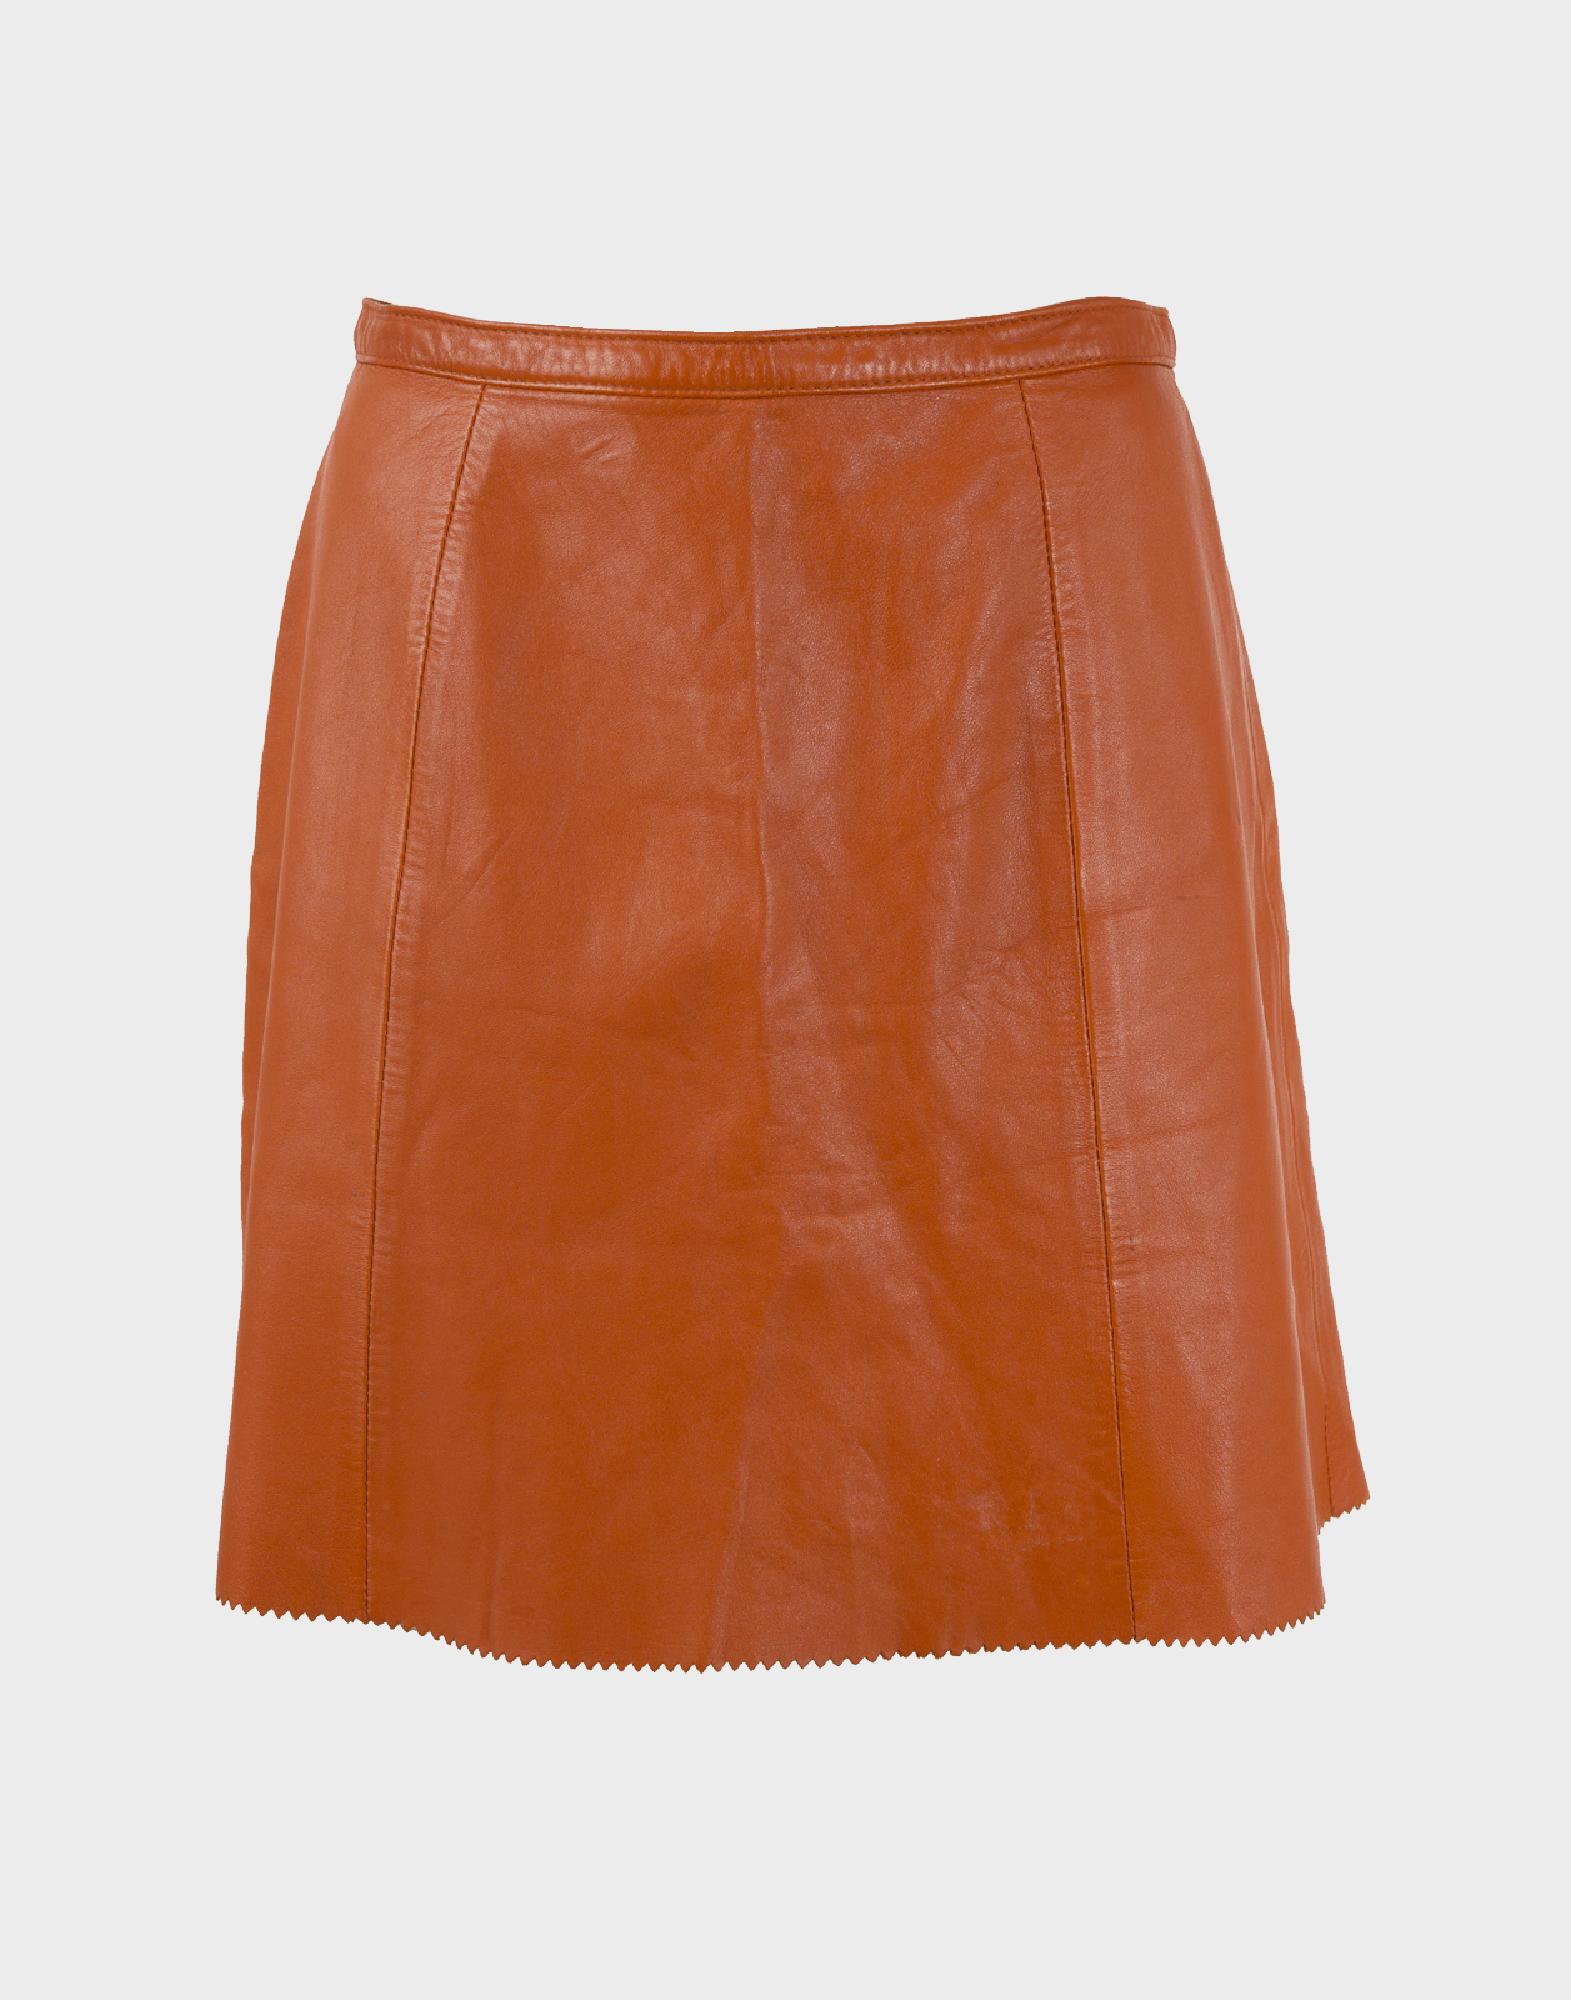 Flared orange leather skirt with back zip and button closure. Photographed on a ghost mannequin against a gray background.